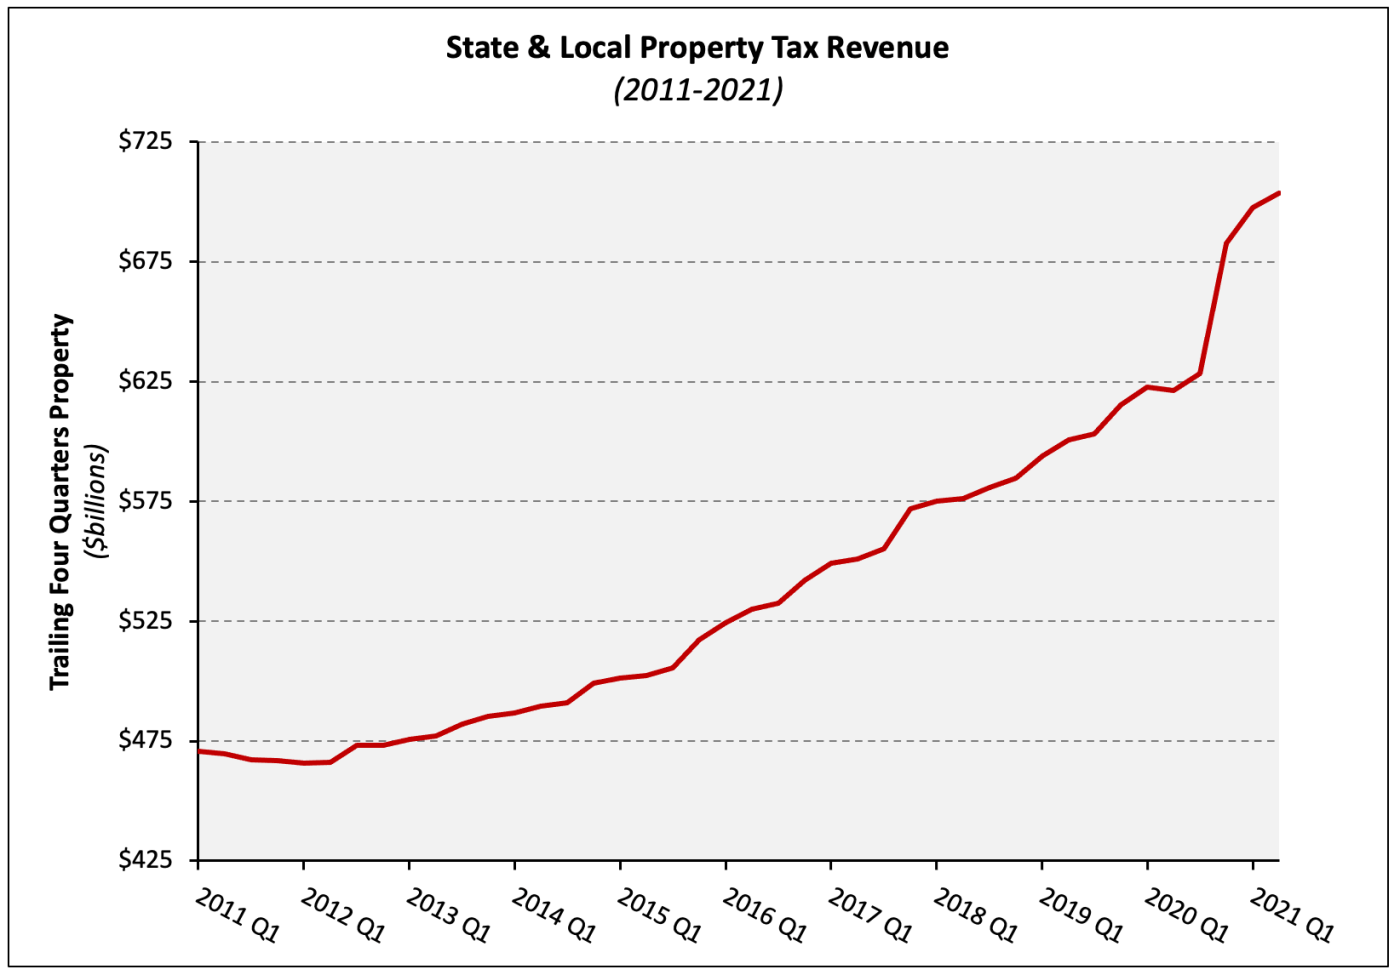 A line graph showing the level of state and local property tax revenue from 2011 to 2021.